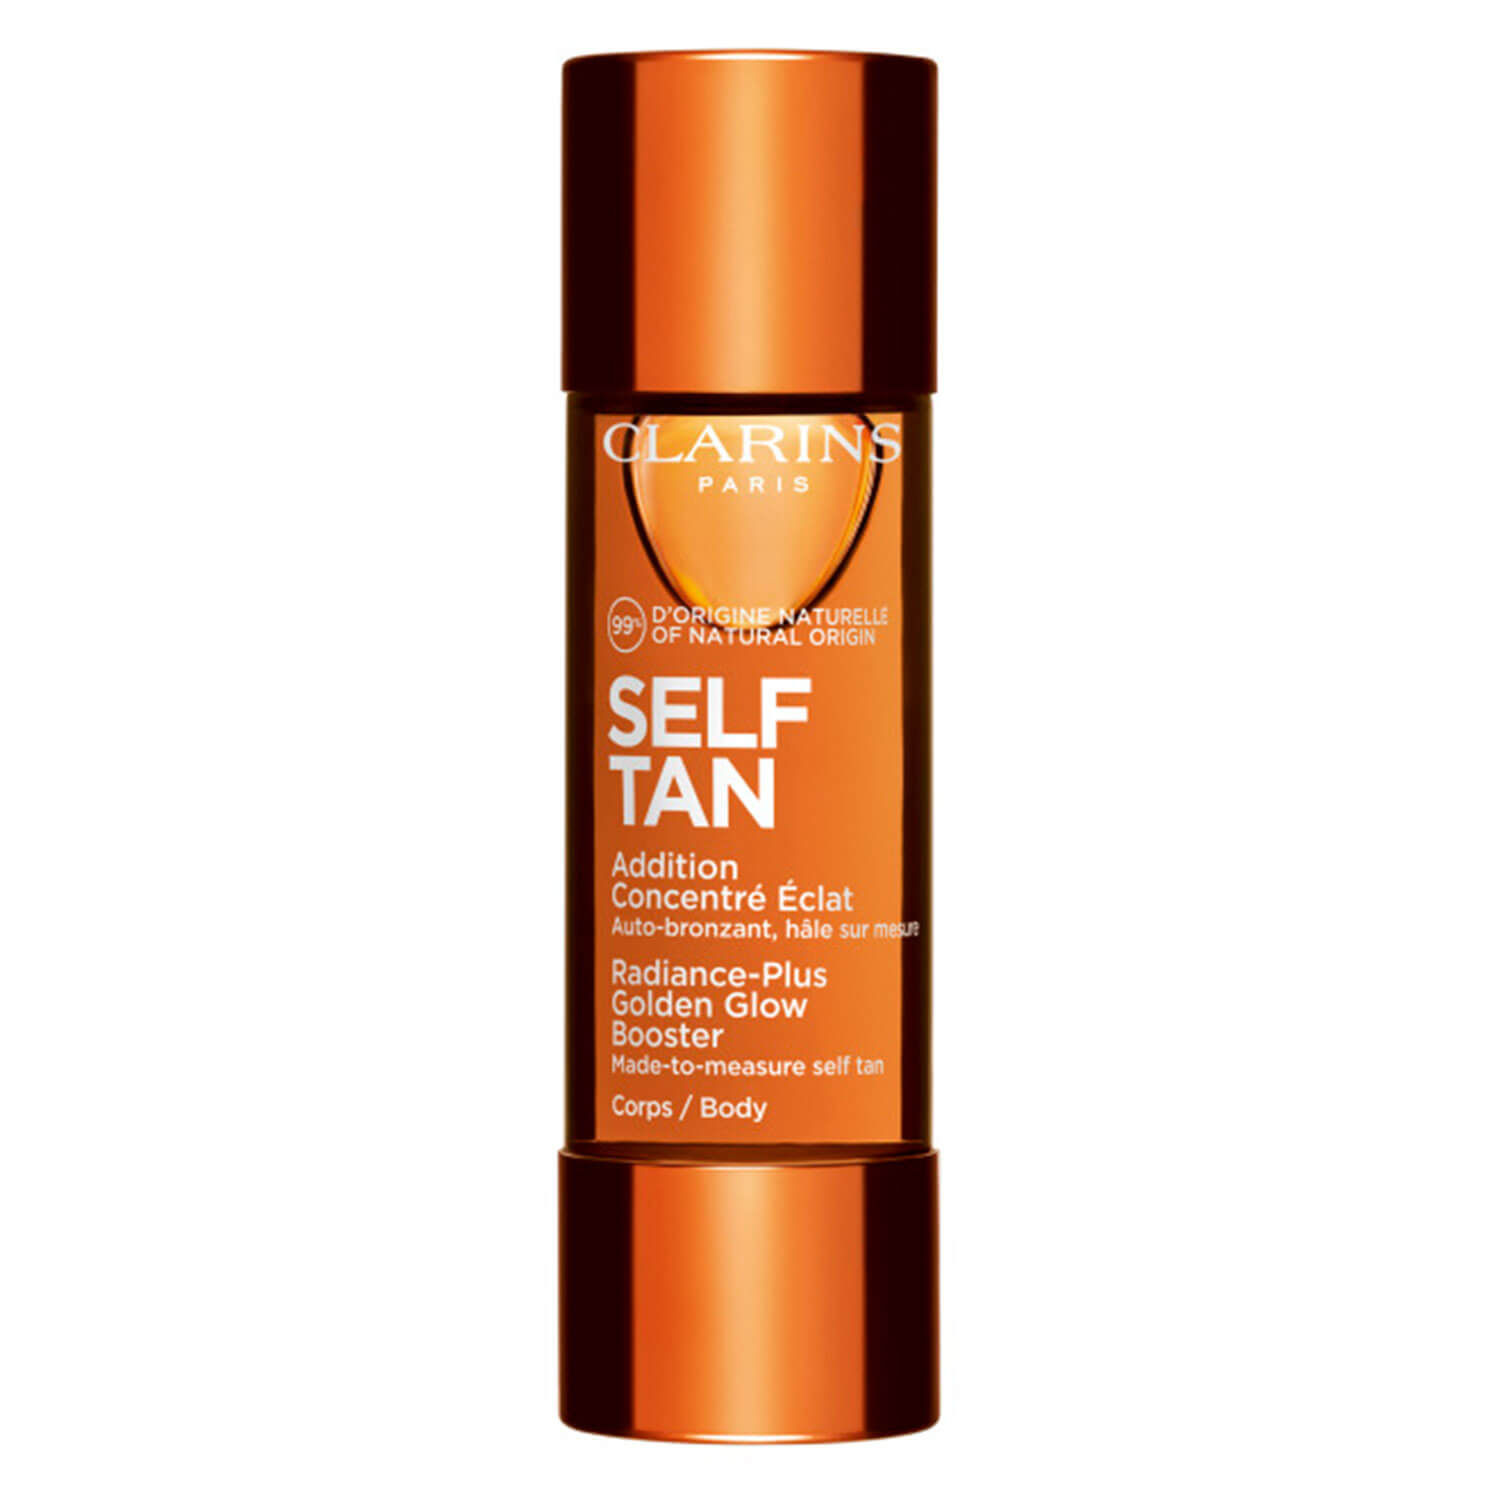 Clarins Self Tan Radiance-Plus Golden Glow Booster Body | PerfectHair.ch